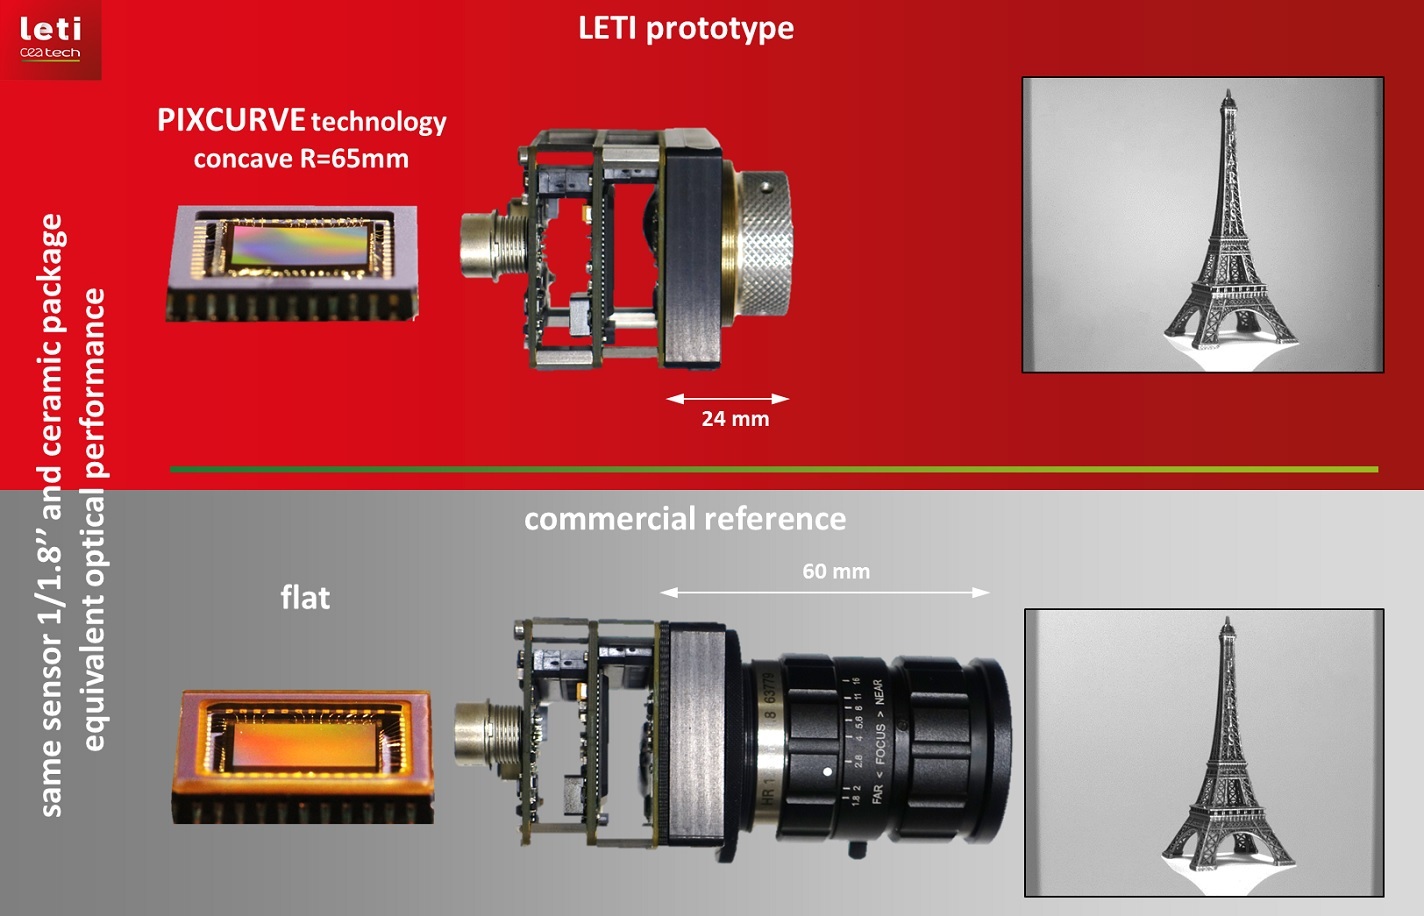 Fig. 1: Leti's prototype with PIXCURVE technology compared to a commercial reference:  performance improves, while size, complexity and cost are reduced.